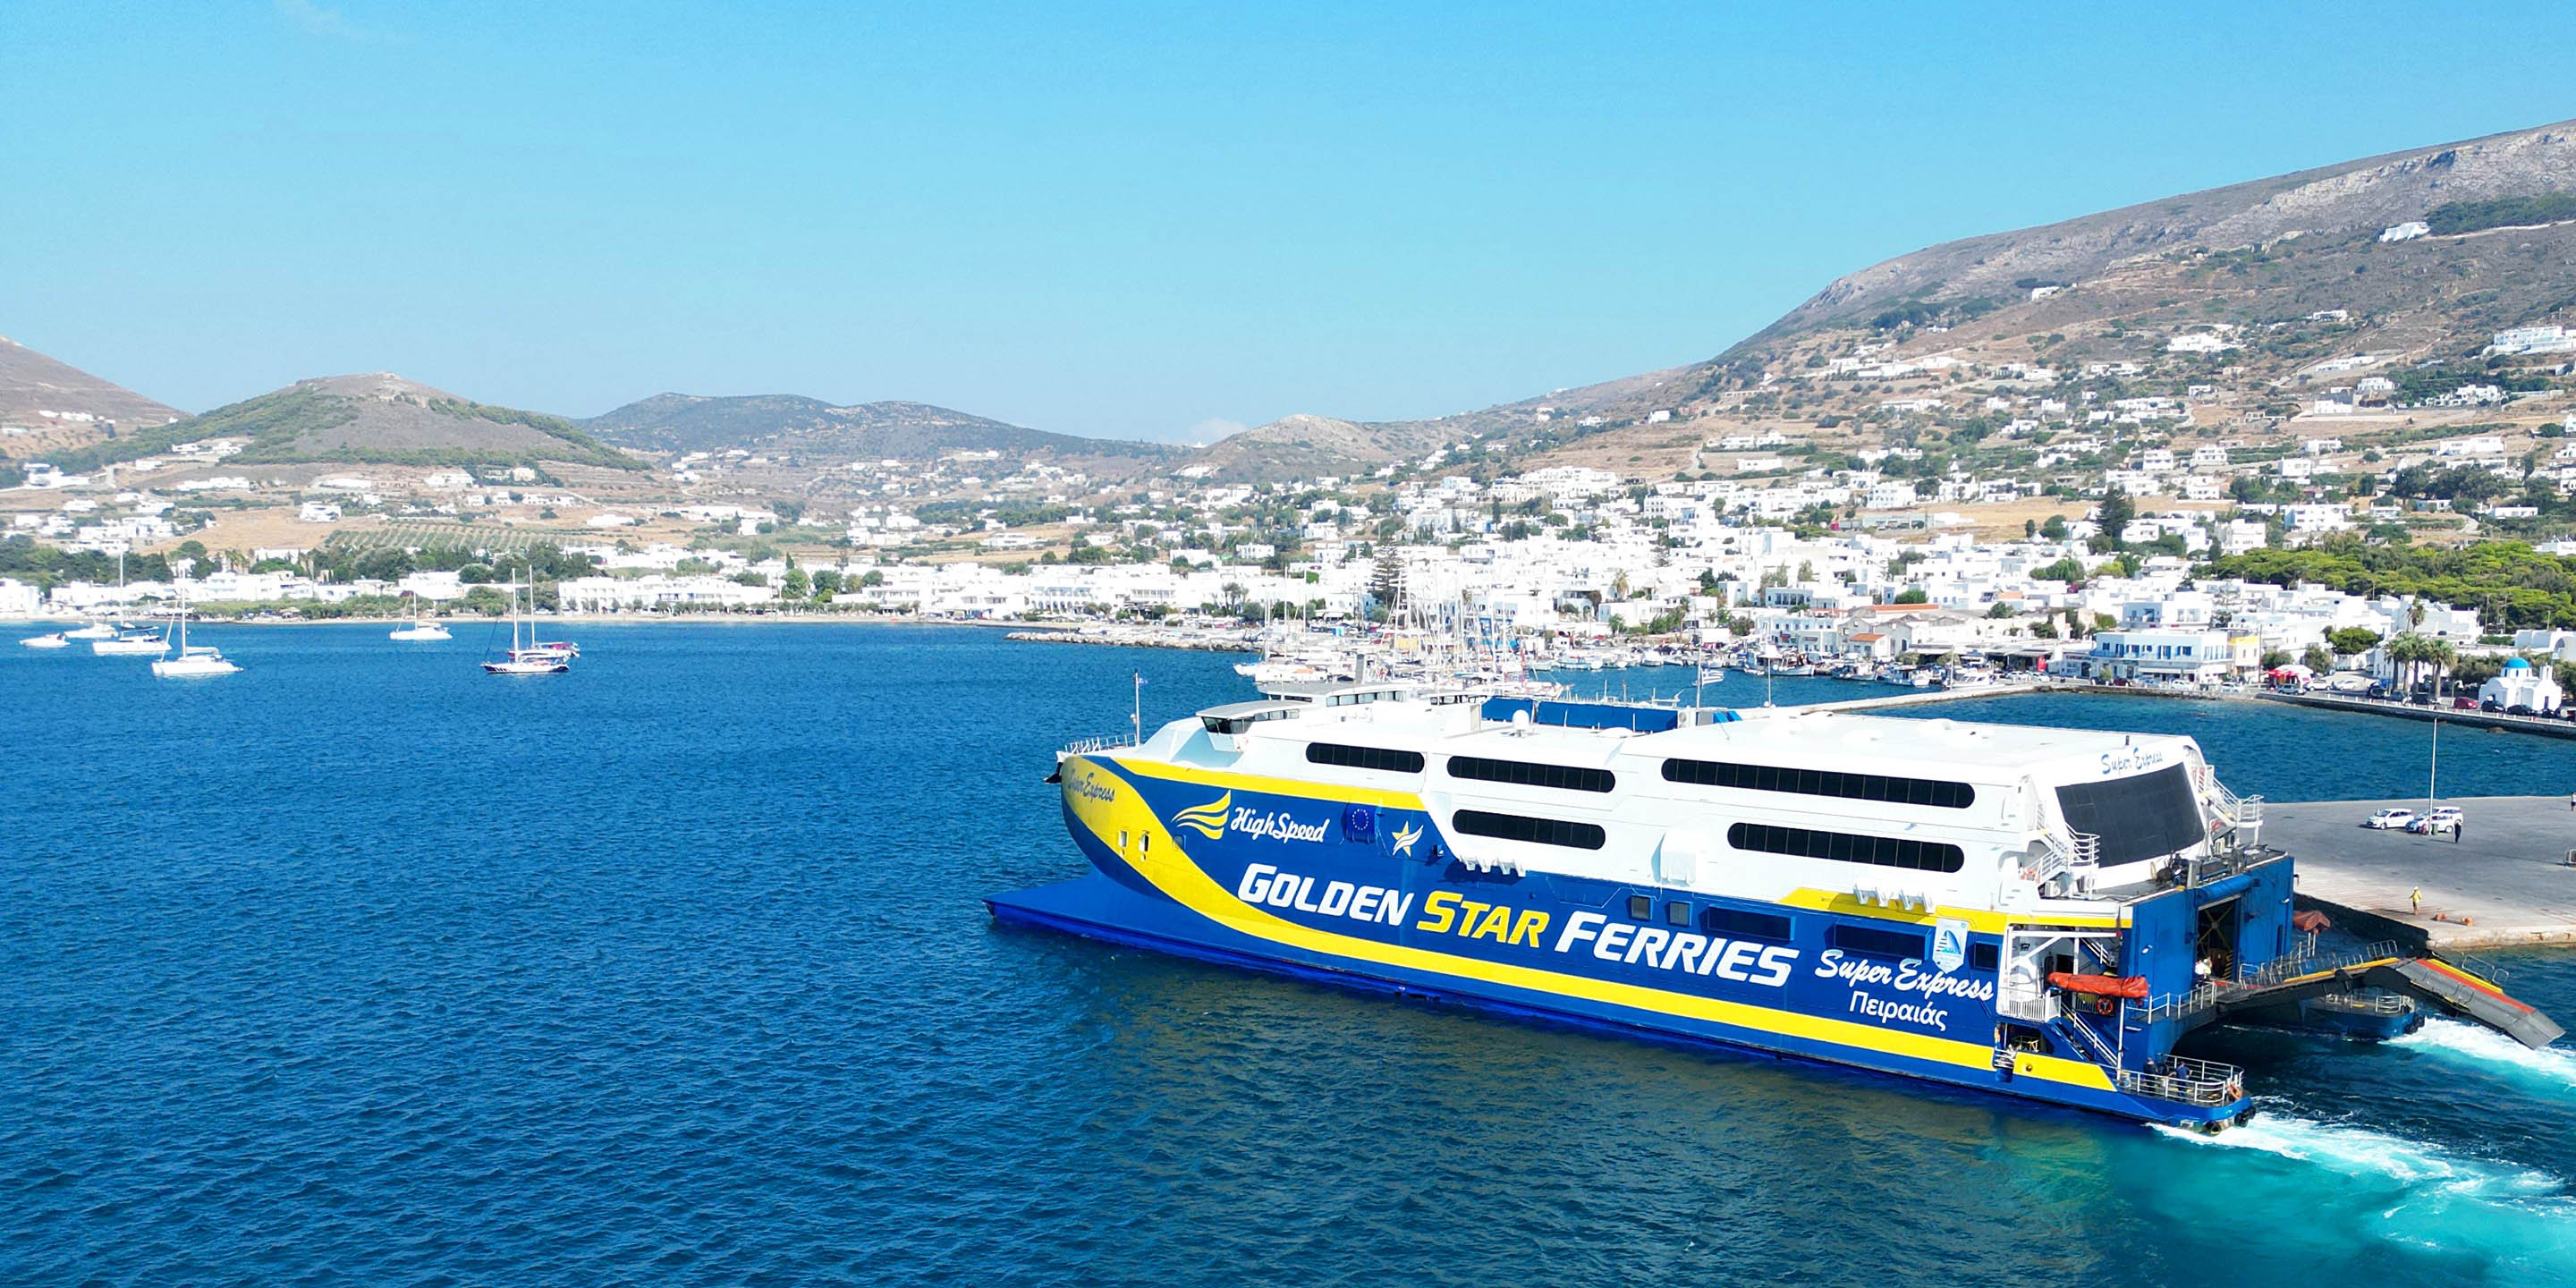 The high-speed ferry Super Express of Golden Star ferries arriving in the port of Parikia in Paros, from Santorini